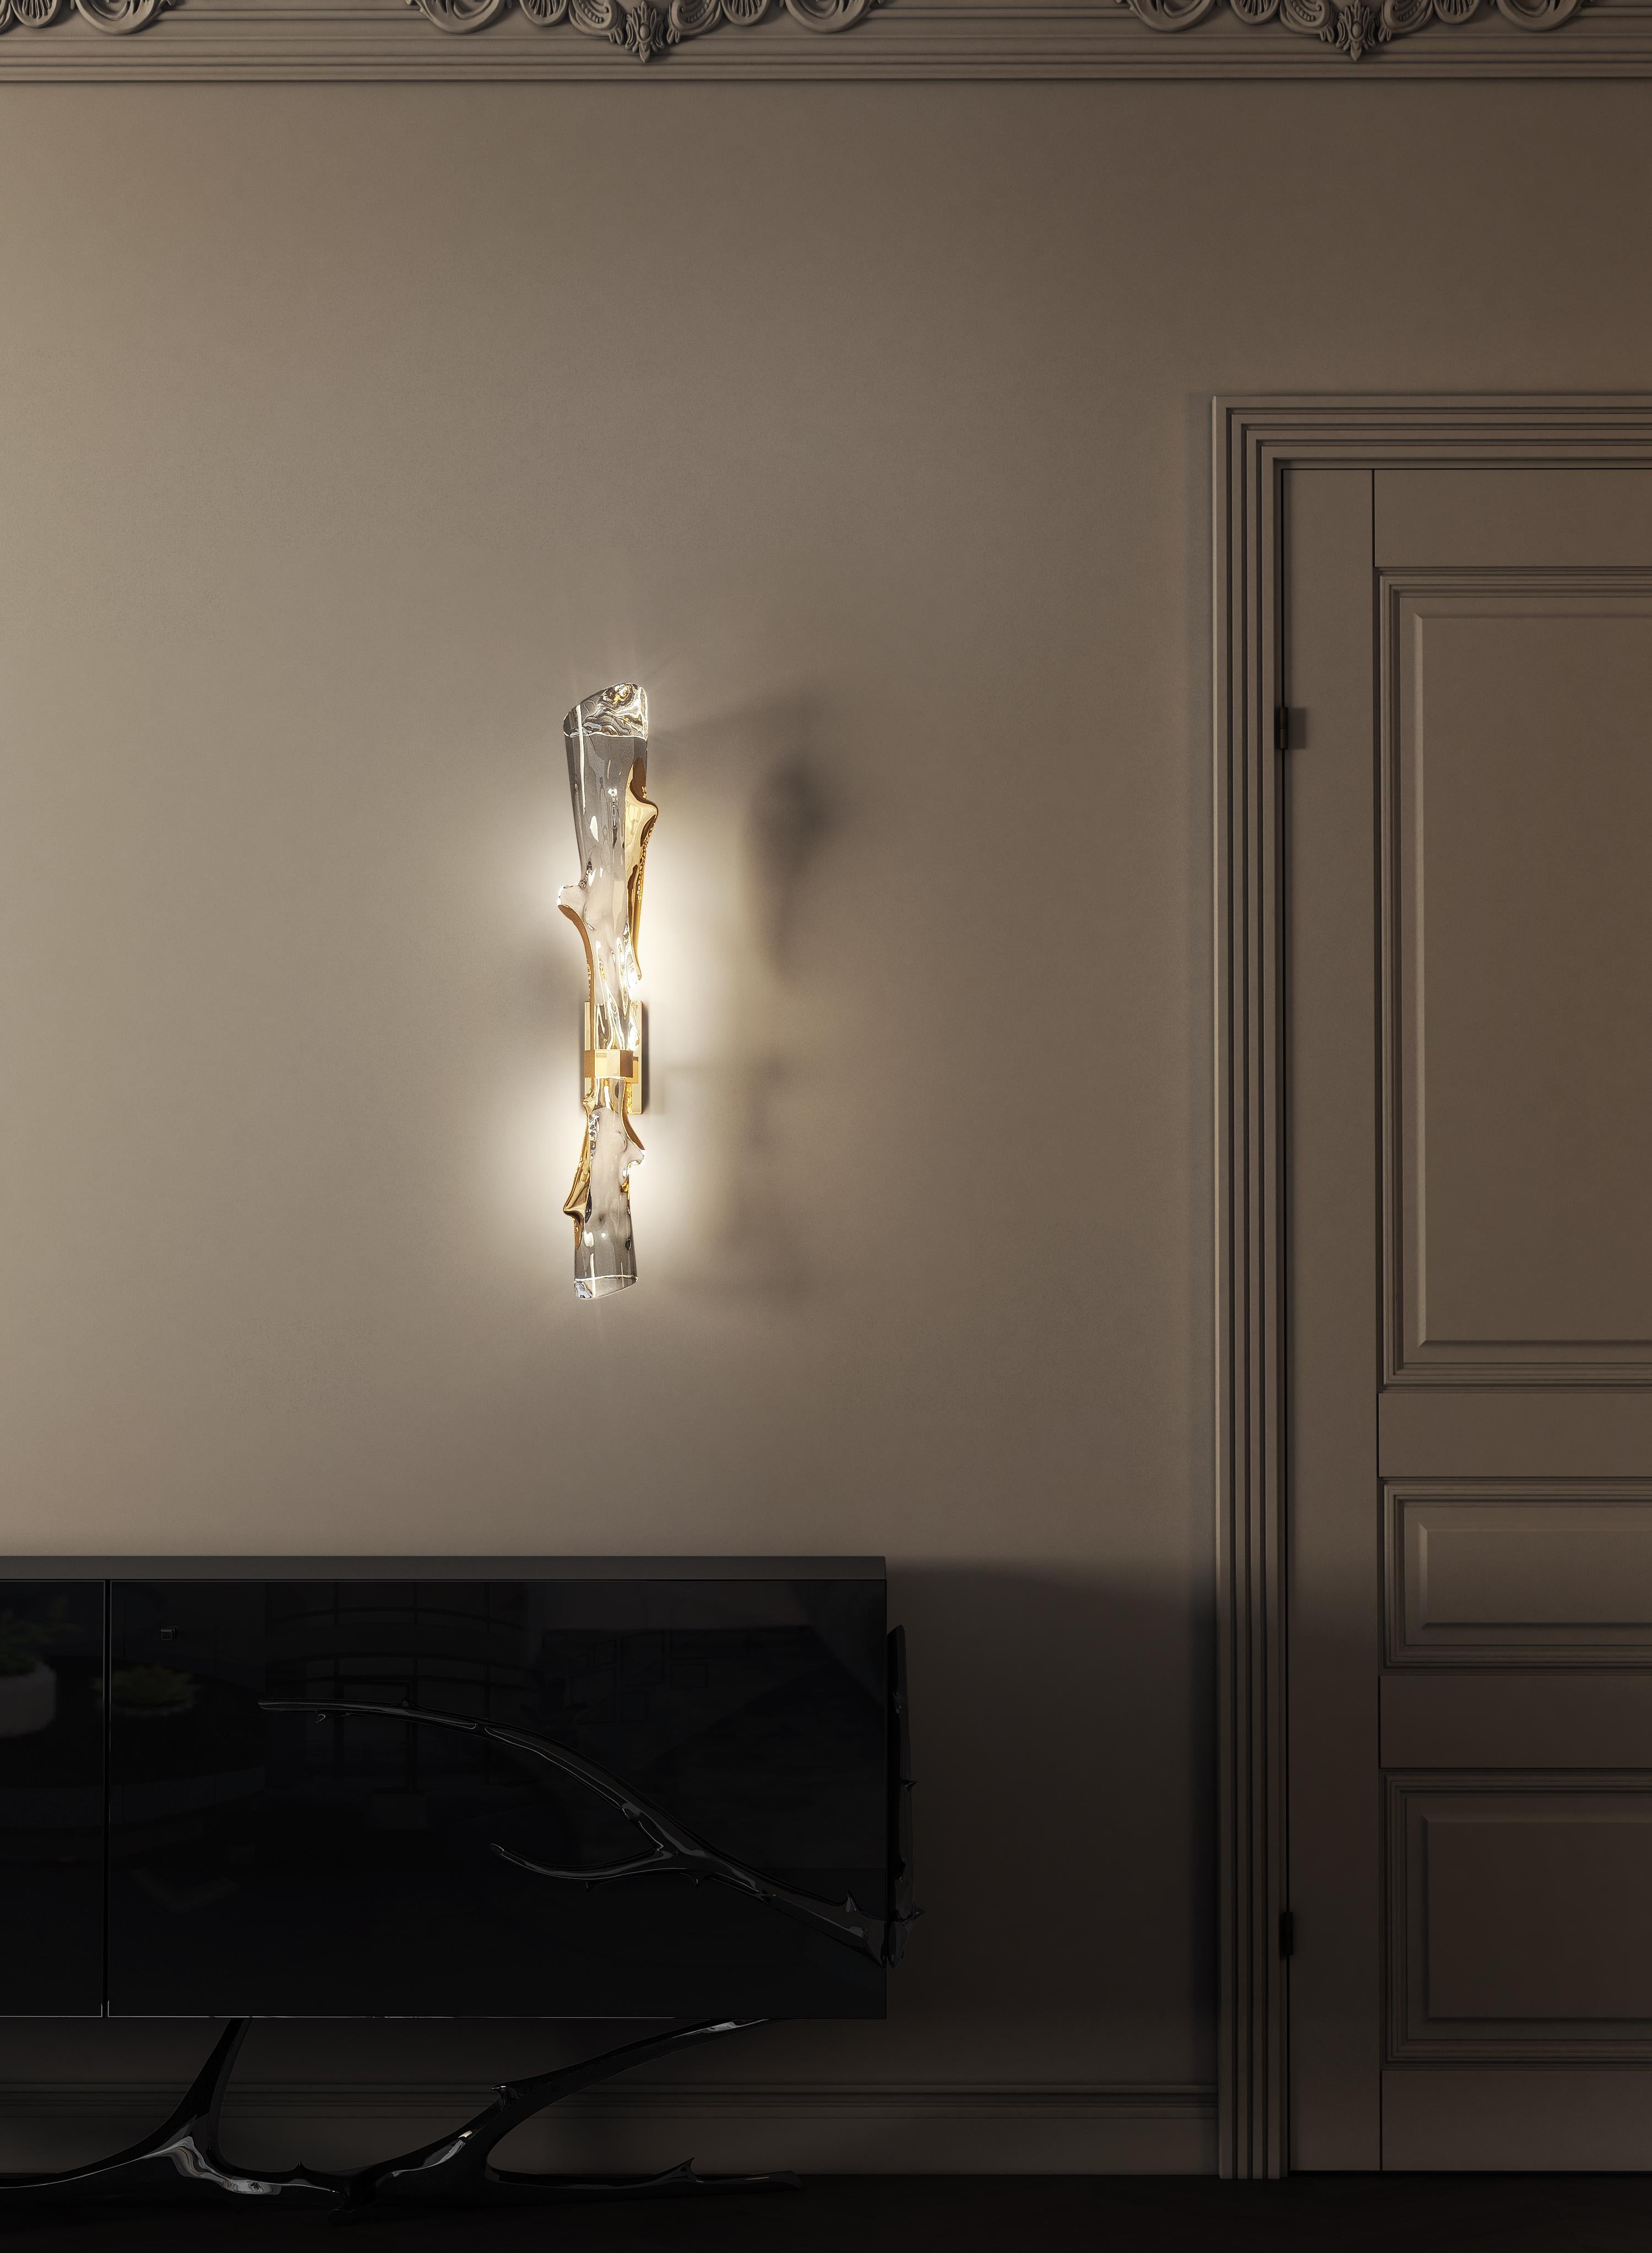 Introducing you to our first 2023 design, the Branch D’or Sconce. A namesake, organic piece instigated by Barlas Baylar. The Branch D’or embraces a sturdy plexi acrylic glass branch with alternating tinges of bronze, complete with custom bronze